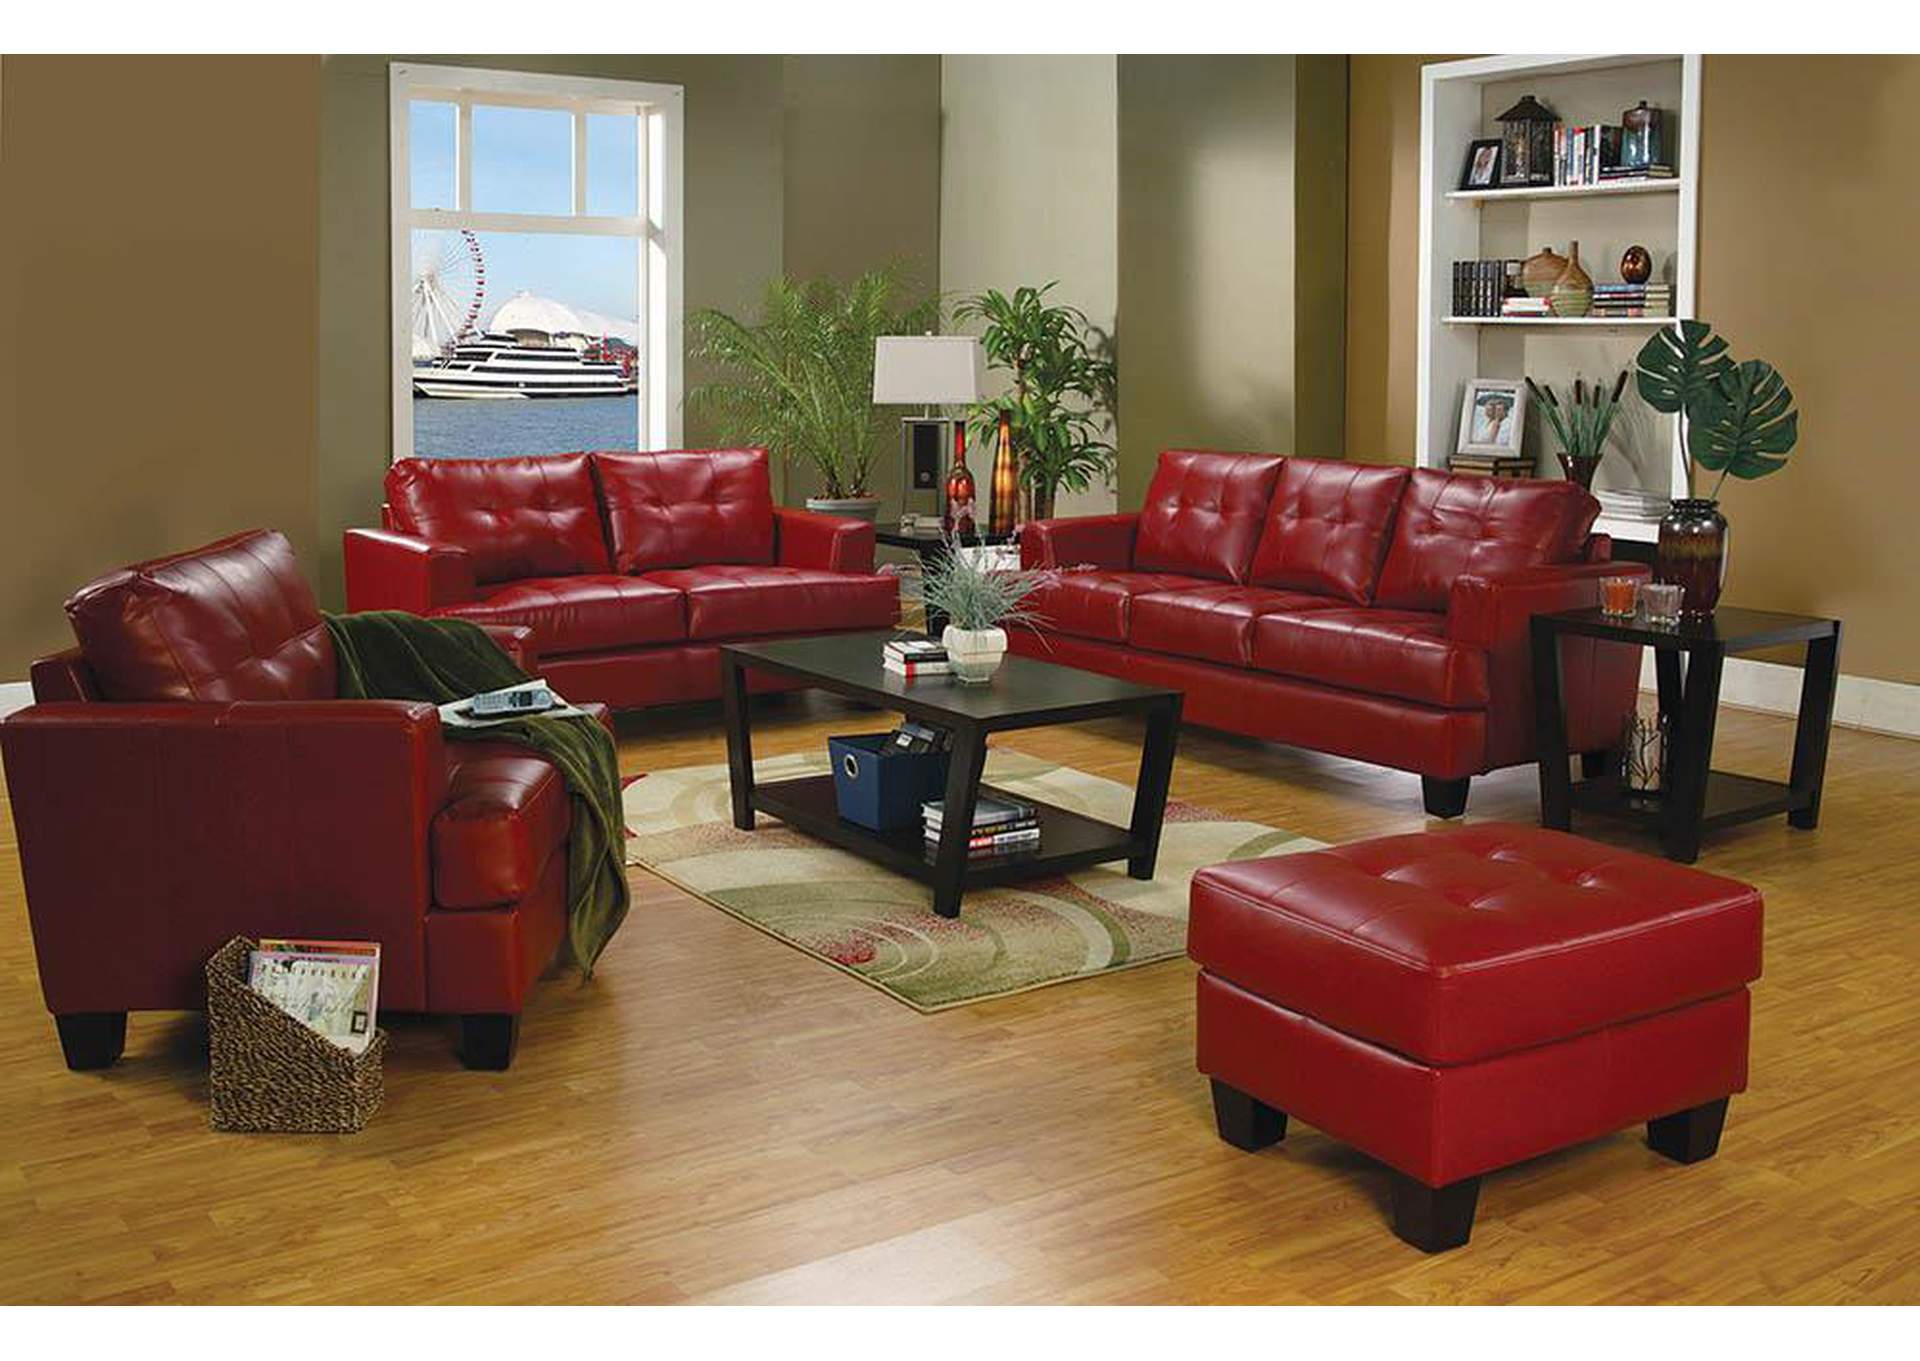 Samuel Red Bonded Leather Chair,ABF Coaster Furniture